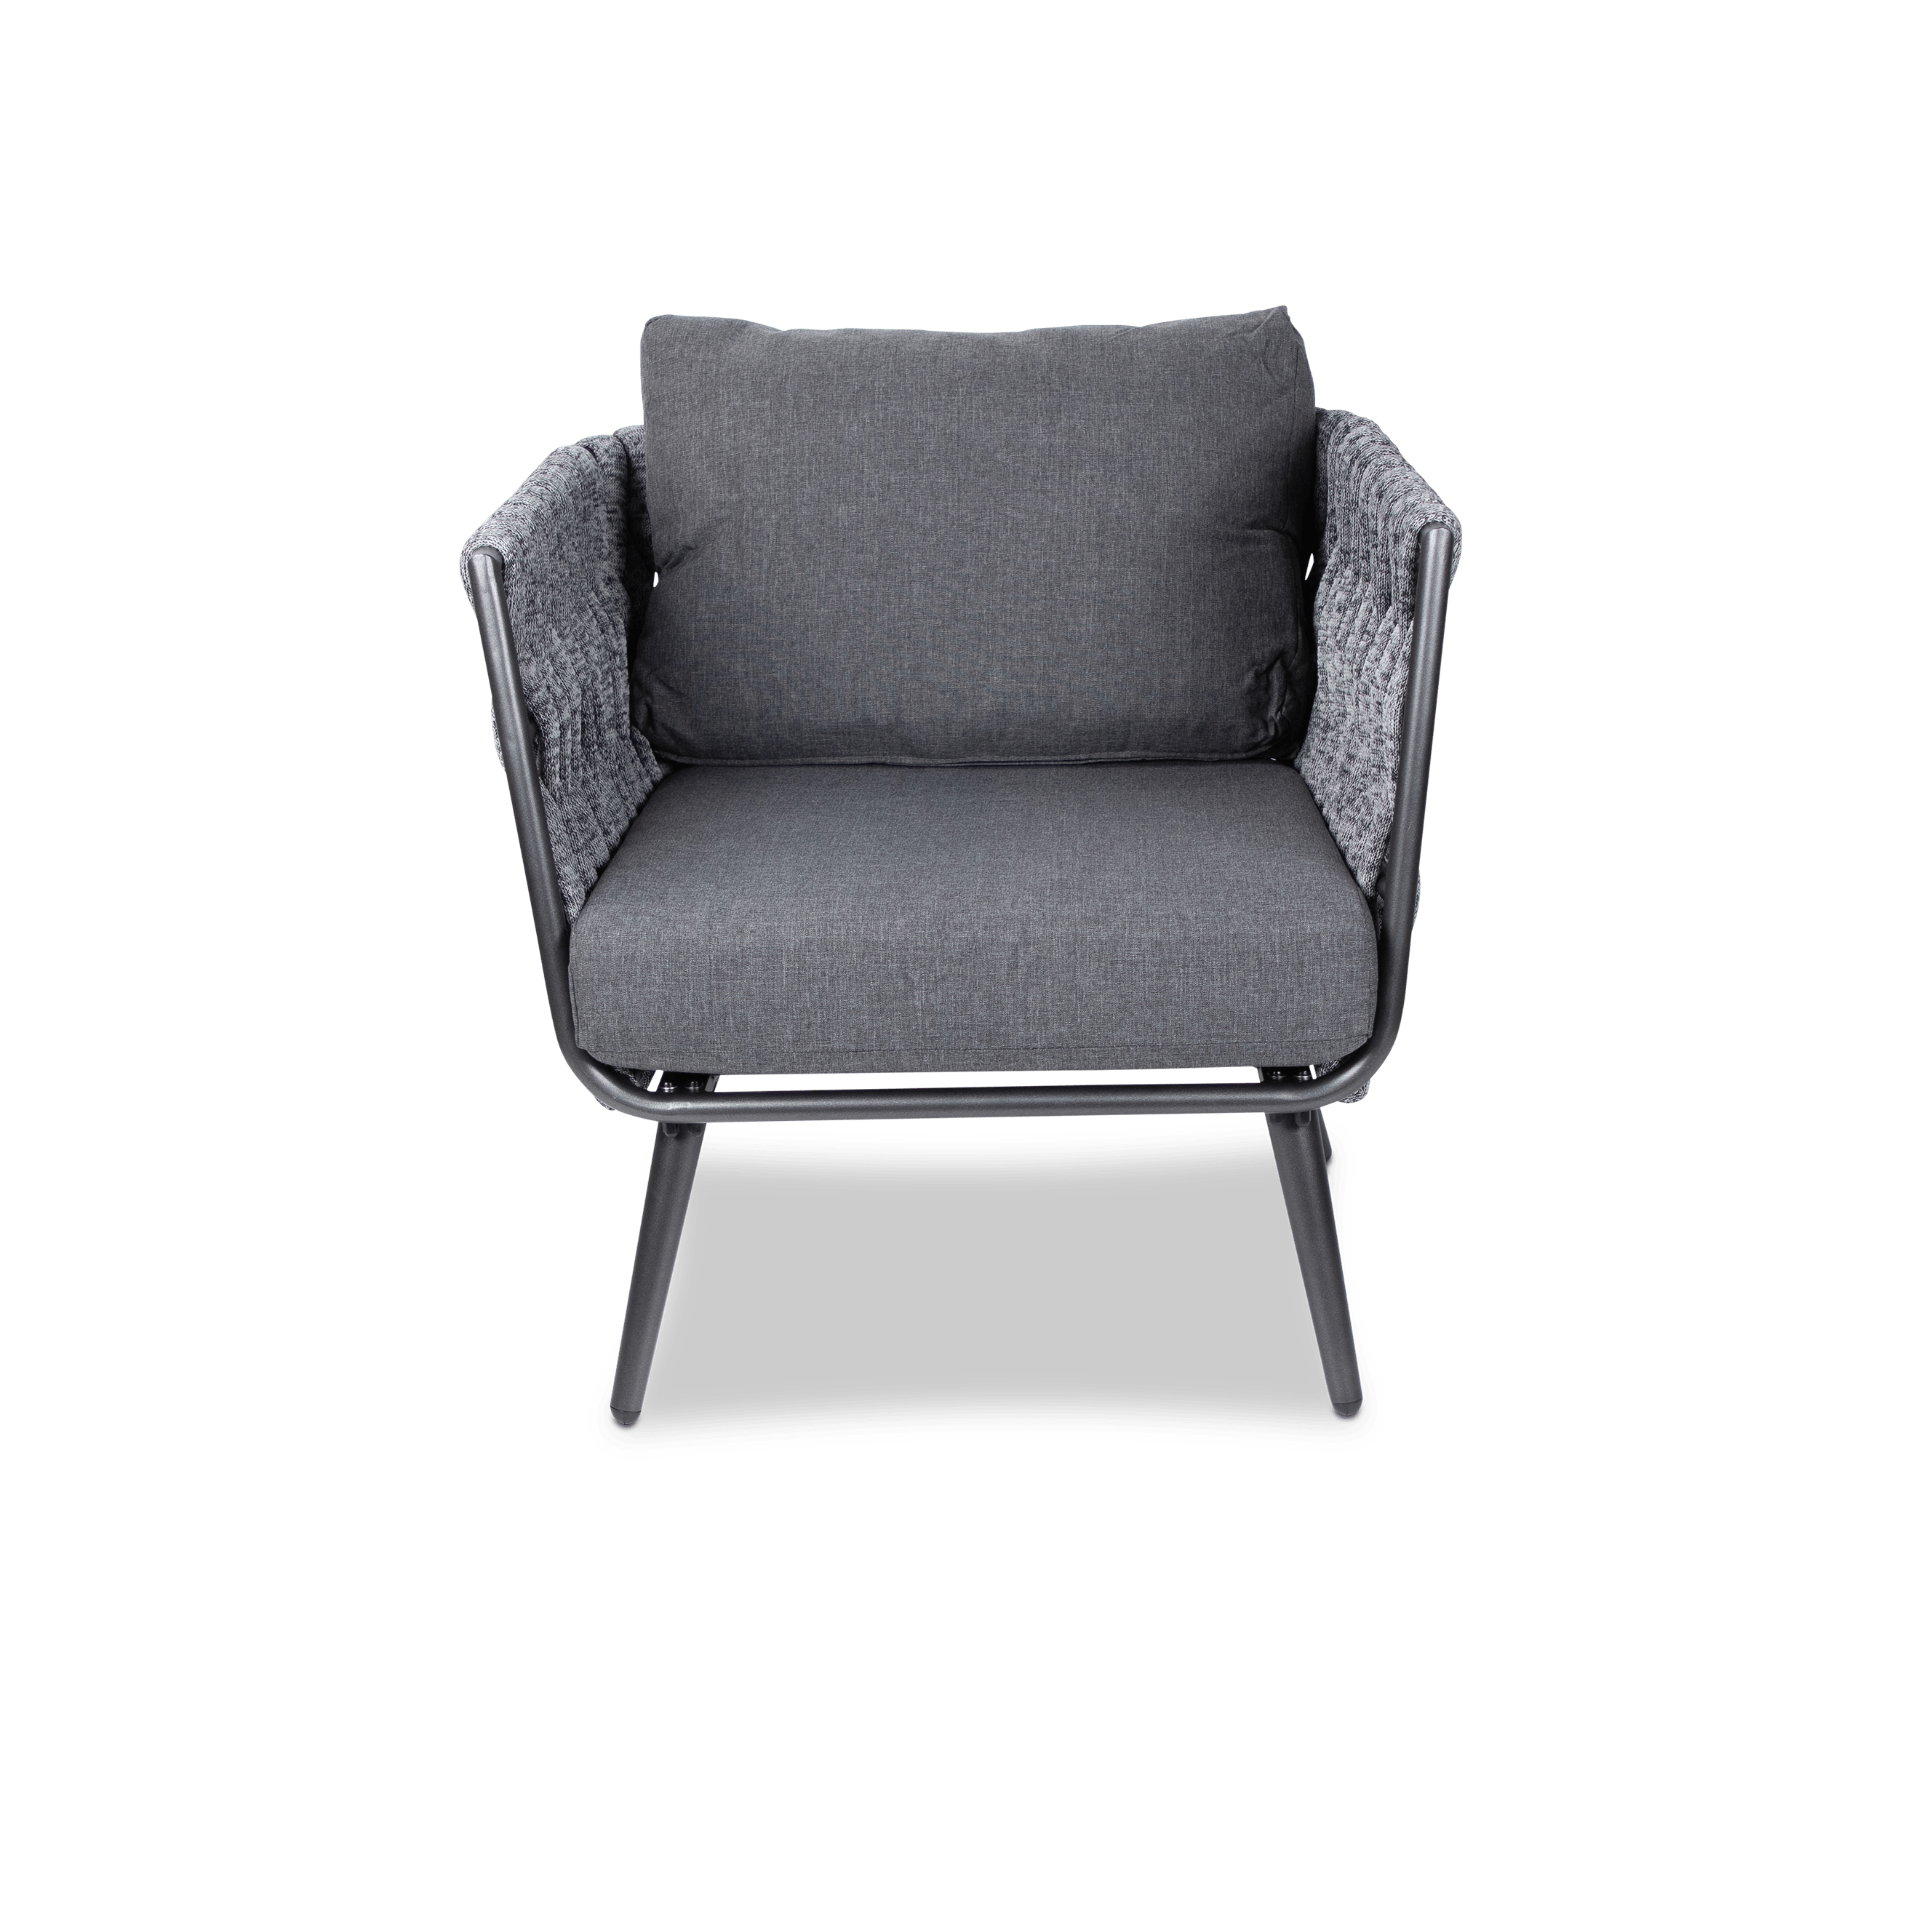 Montego 3 Seater, 2 Seater, Armchair and Coffee Table in Gunmetal Grey with Charcoal Spun Poly Cushions and Midnight Fleck Olefin Rope - The Furniture Shack